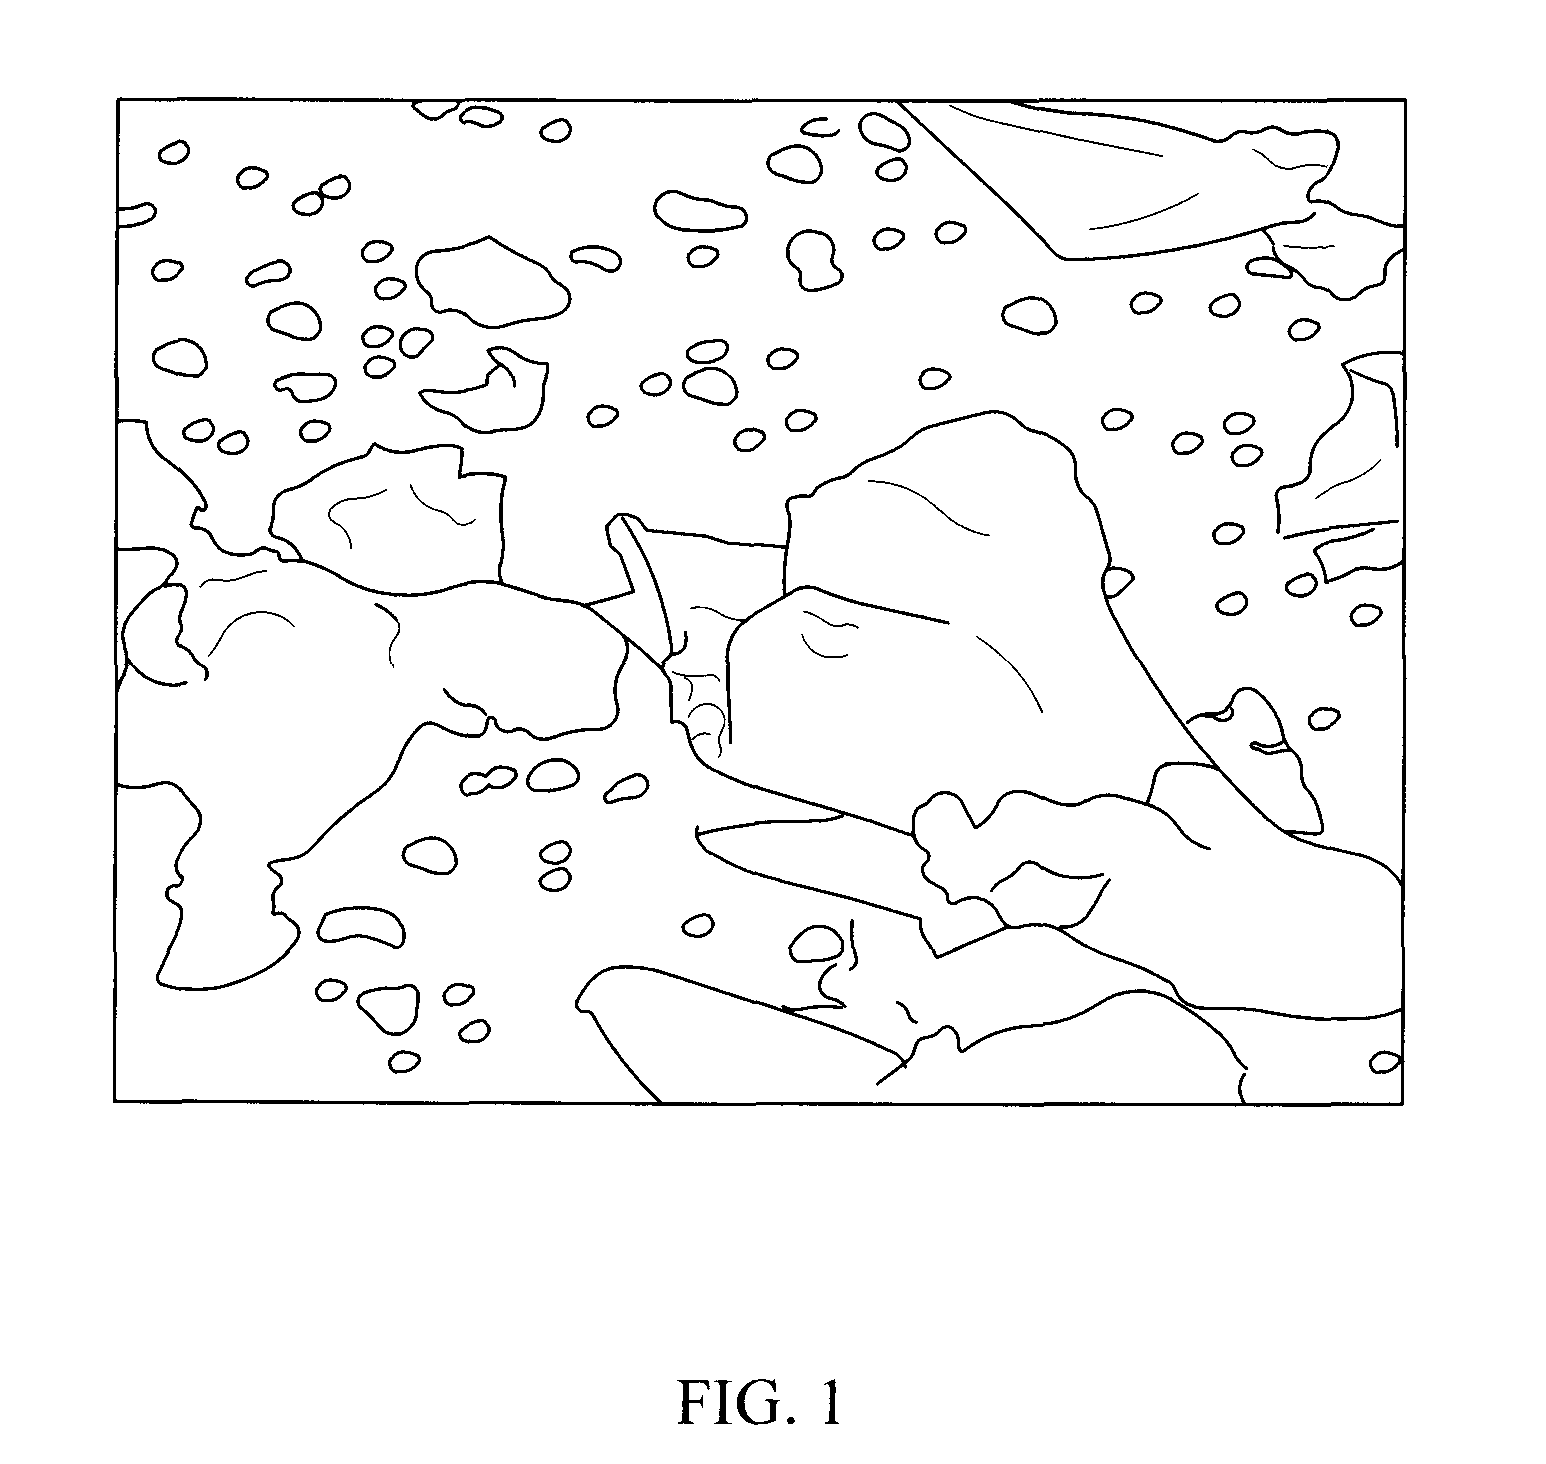 Method of reducing silicosis caused by inhalation of silica-containing proppant, such as silica sand and resin-coated sand, and apparatus therefor